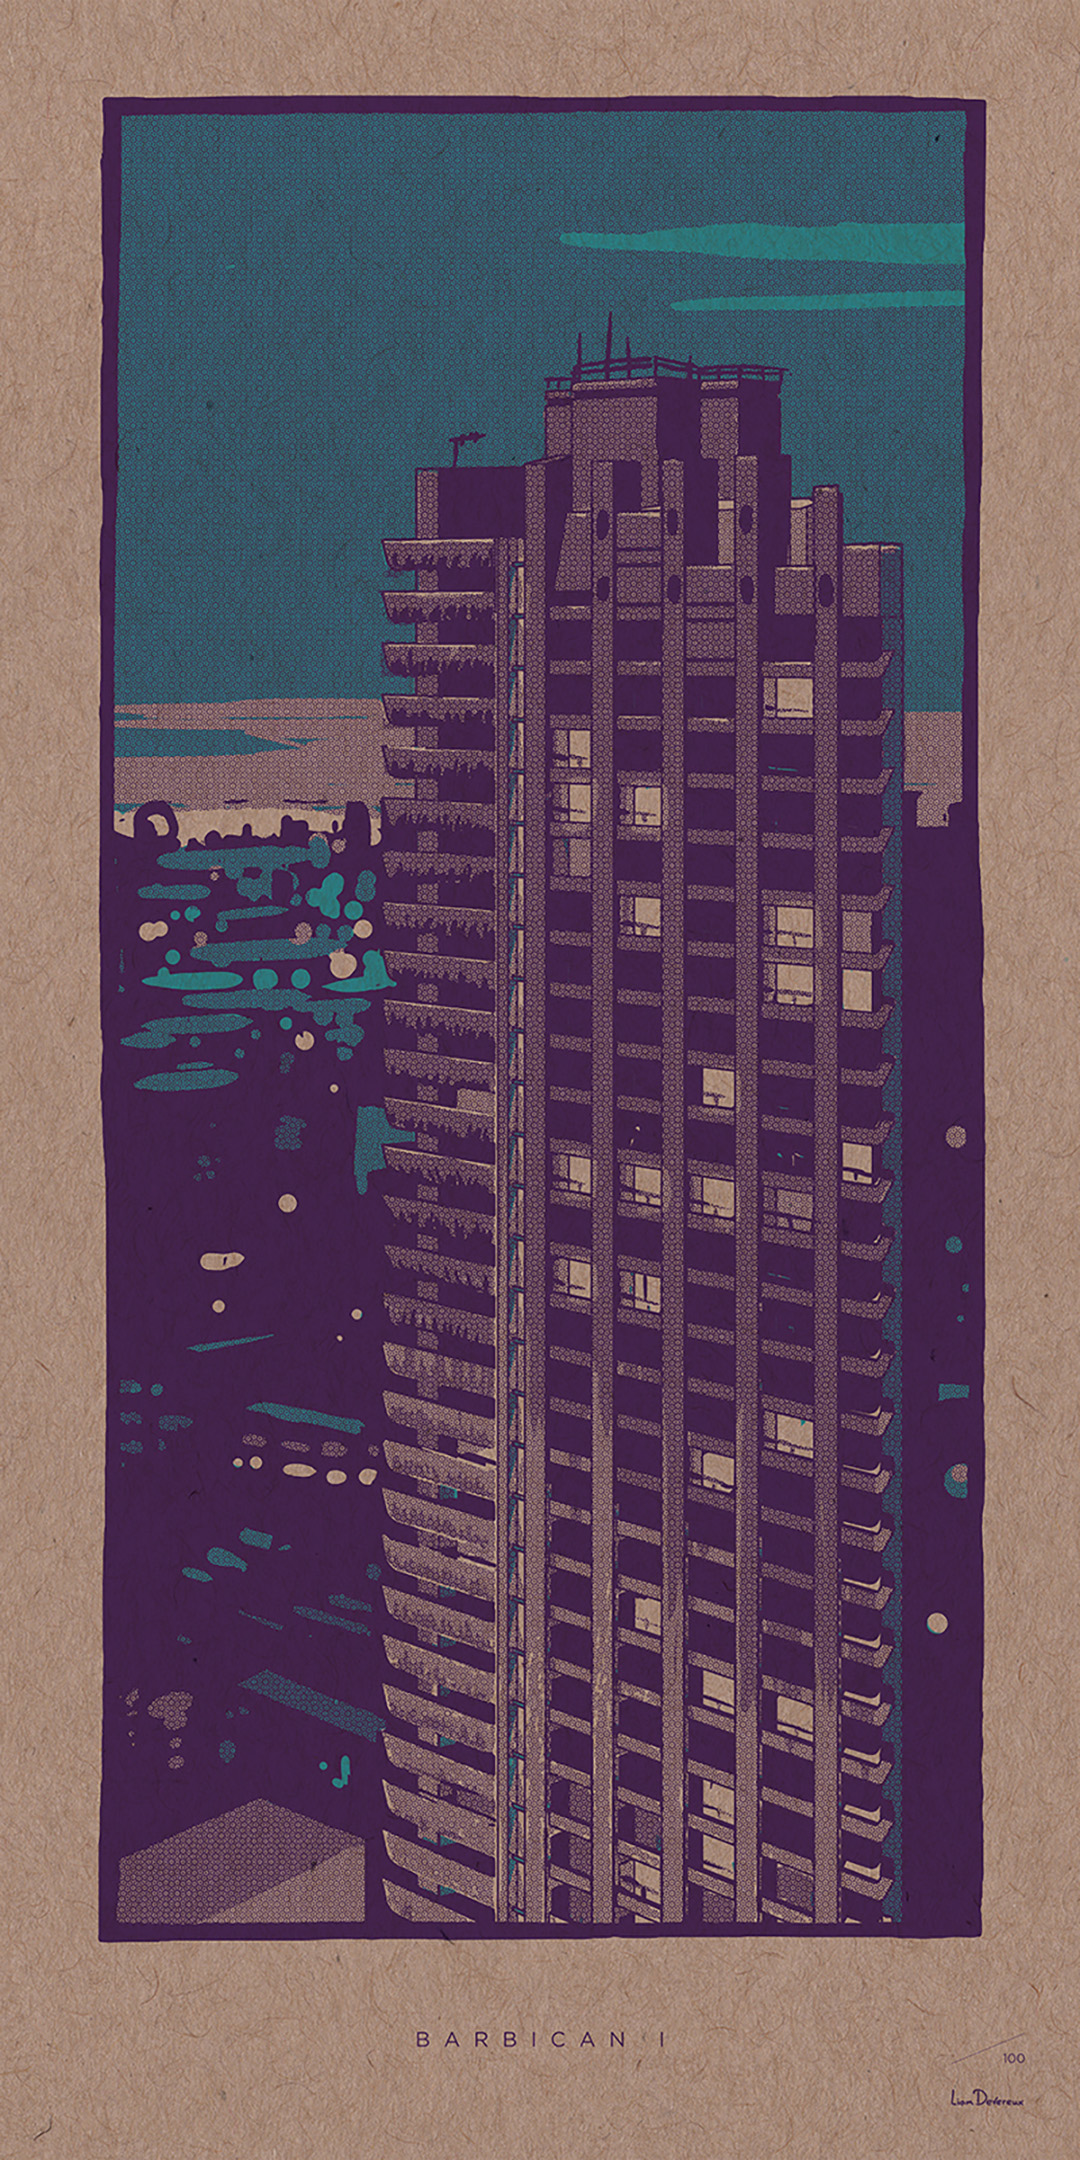 Barbican I - Liam Devereux | 30x60mm Giclee print on 450mic recycled Kraft card